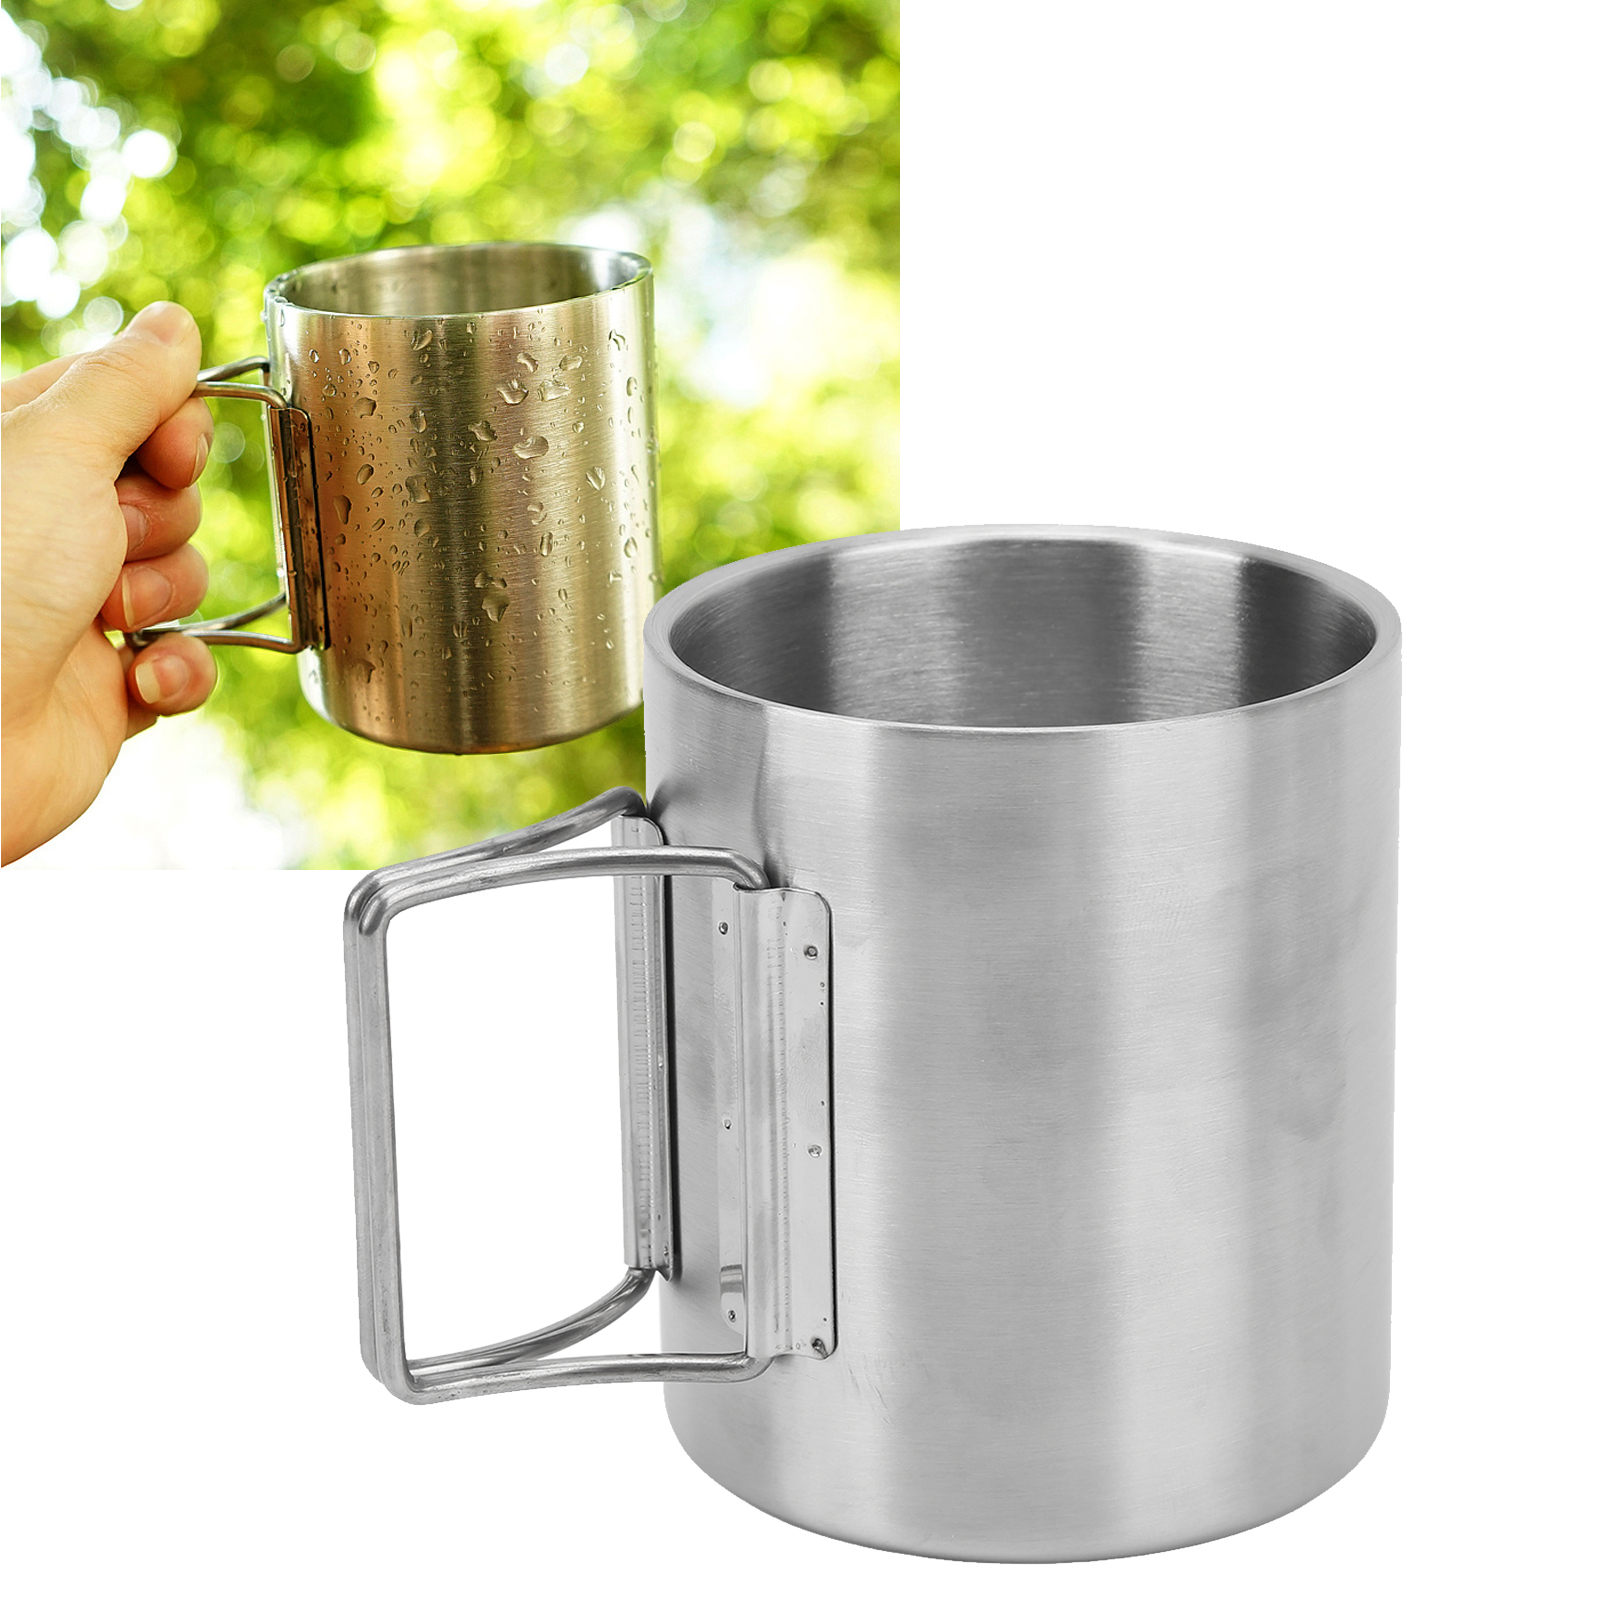 Camping　For　Steel　Mug,　For　Anti　Scalding　Thermal　Lightweight　Stainless　Camping　Mug　Insulation　Mountaineering　Hiking